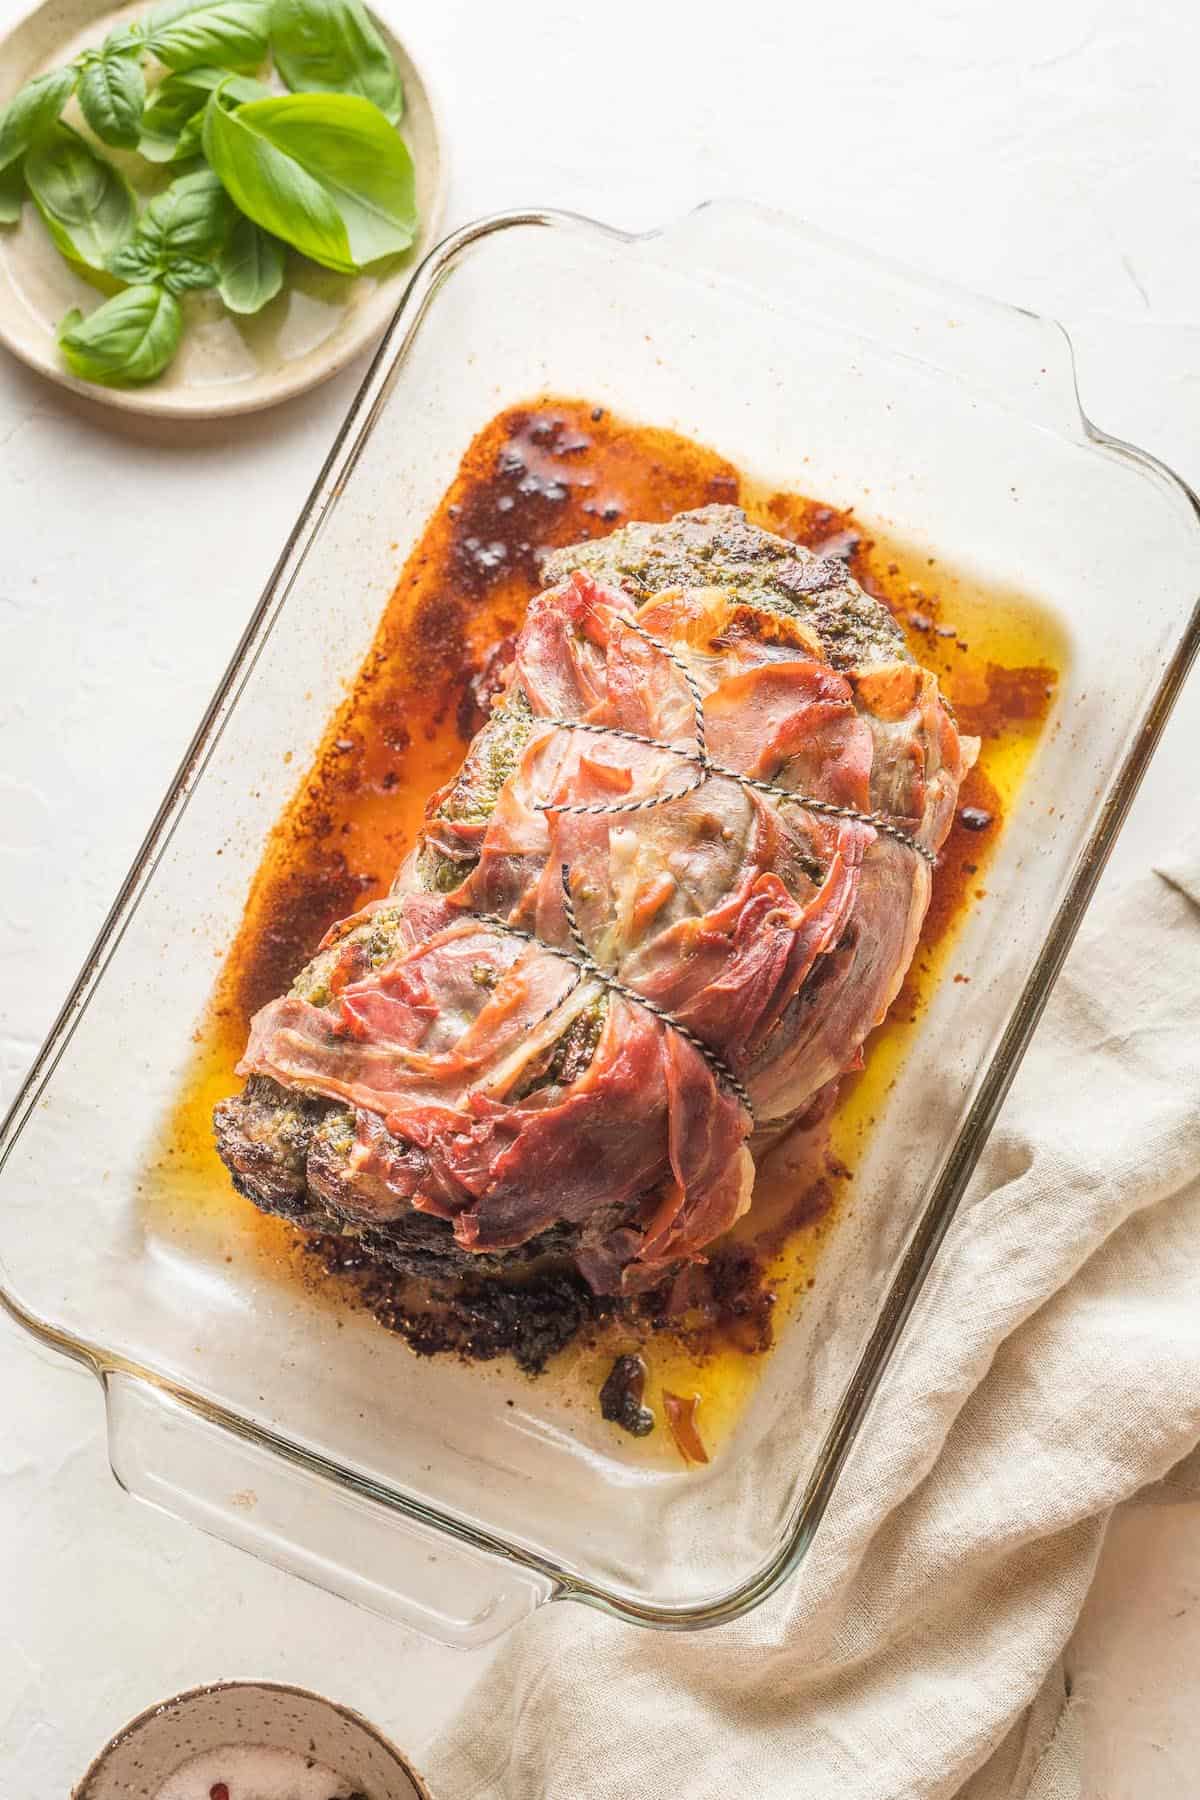 A prosciutto wrapped beef roast in a glass baking dish.